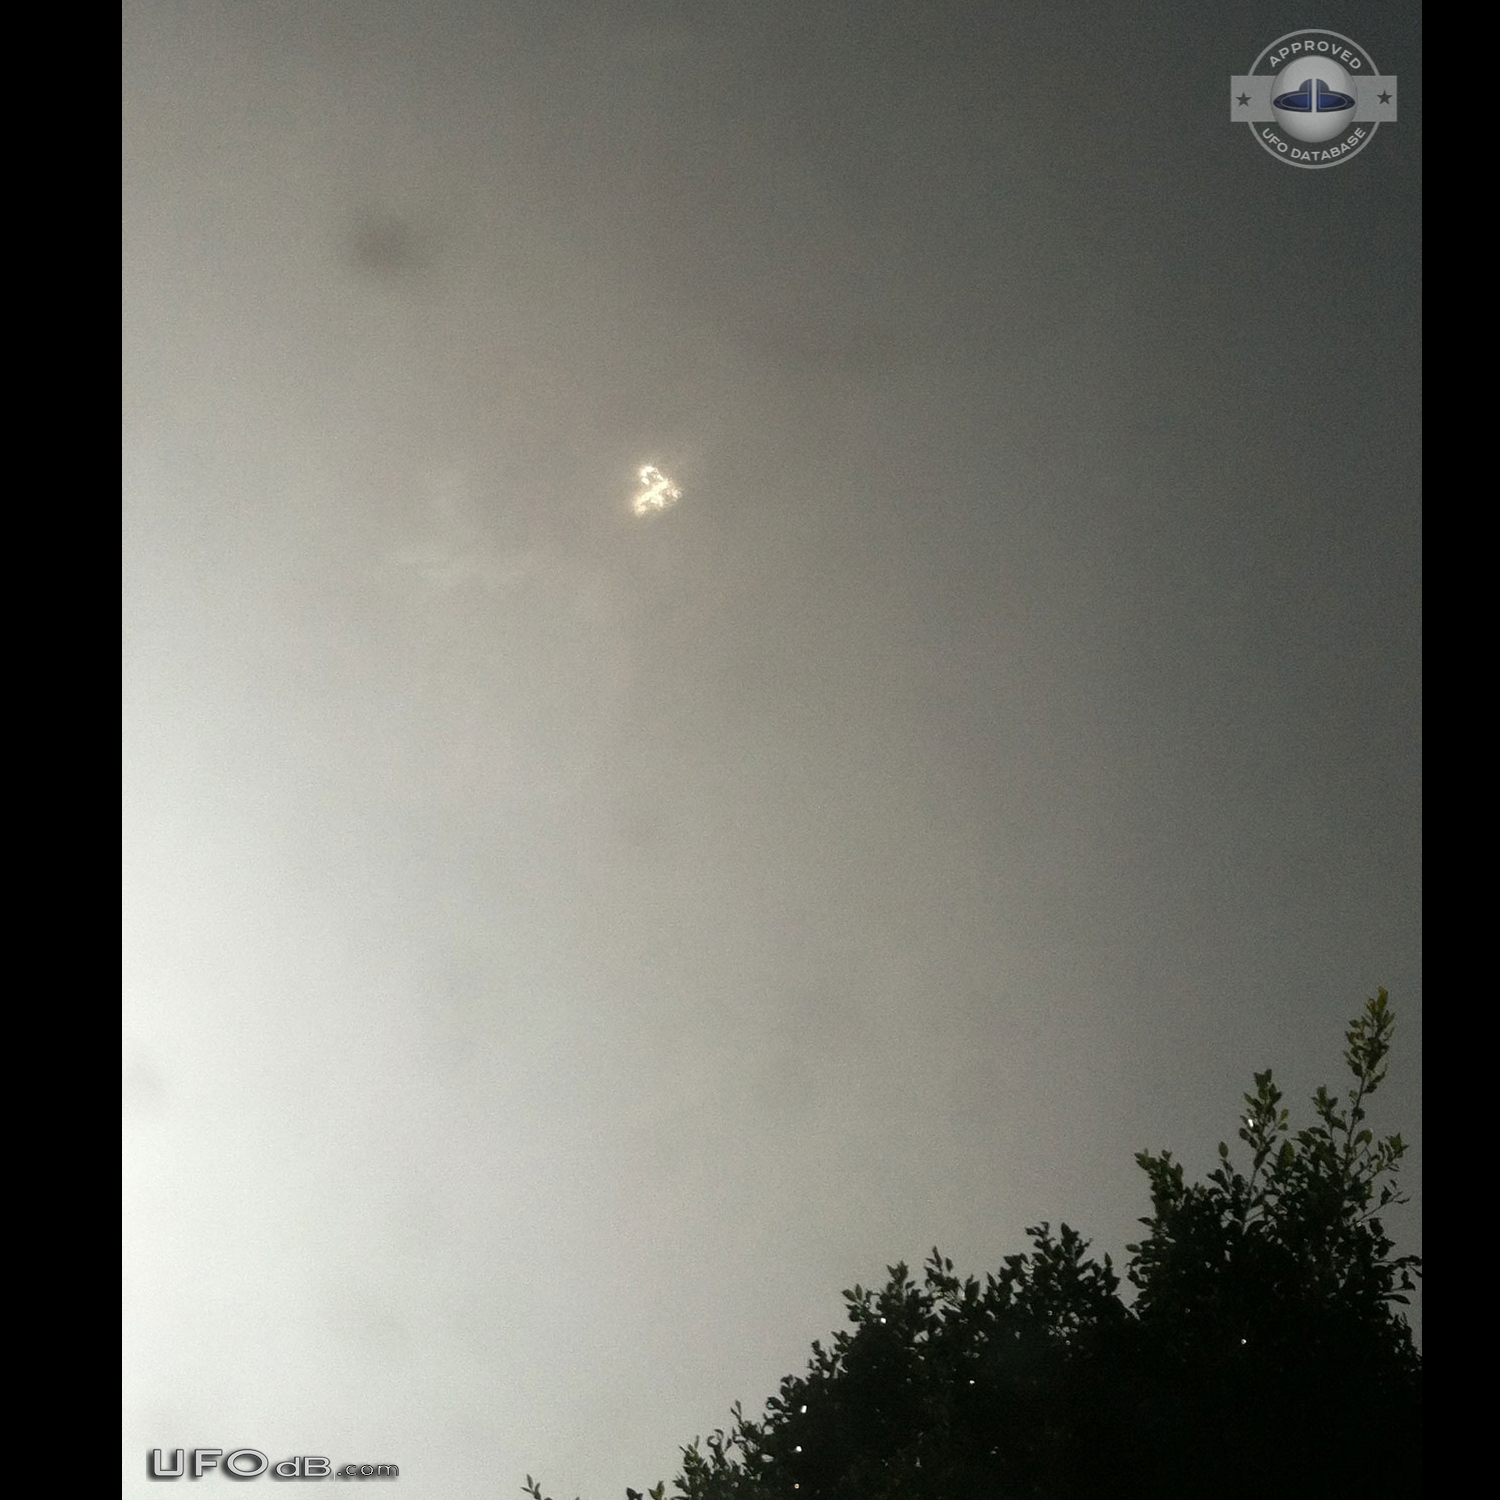 UFO appeared, disappeared and appeared again in Los Angeles CA 2015 UFO Picture #651-1